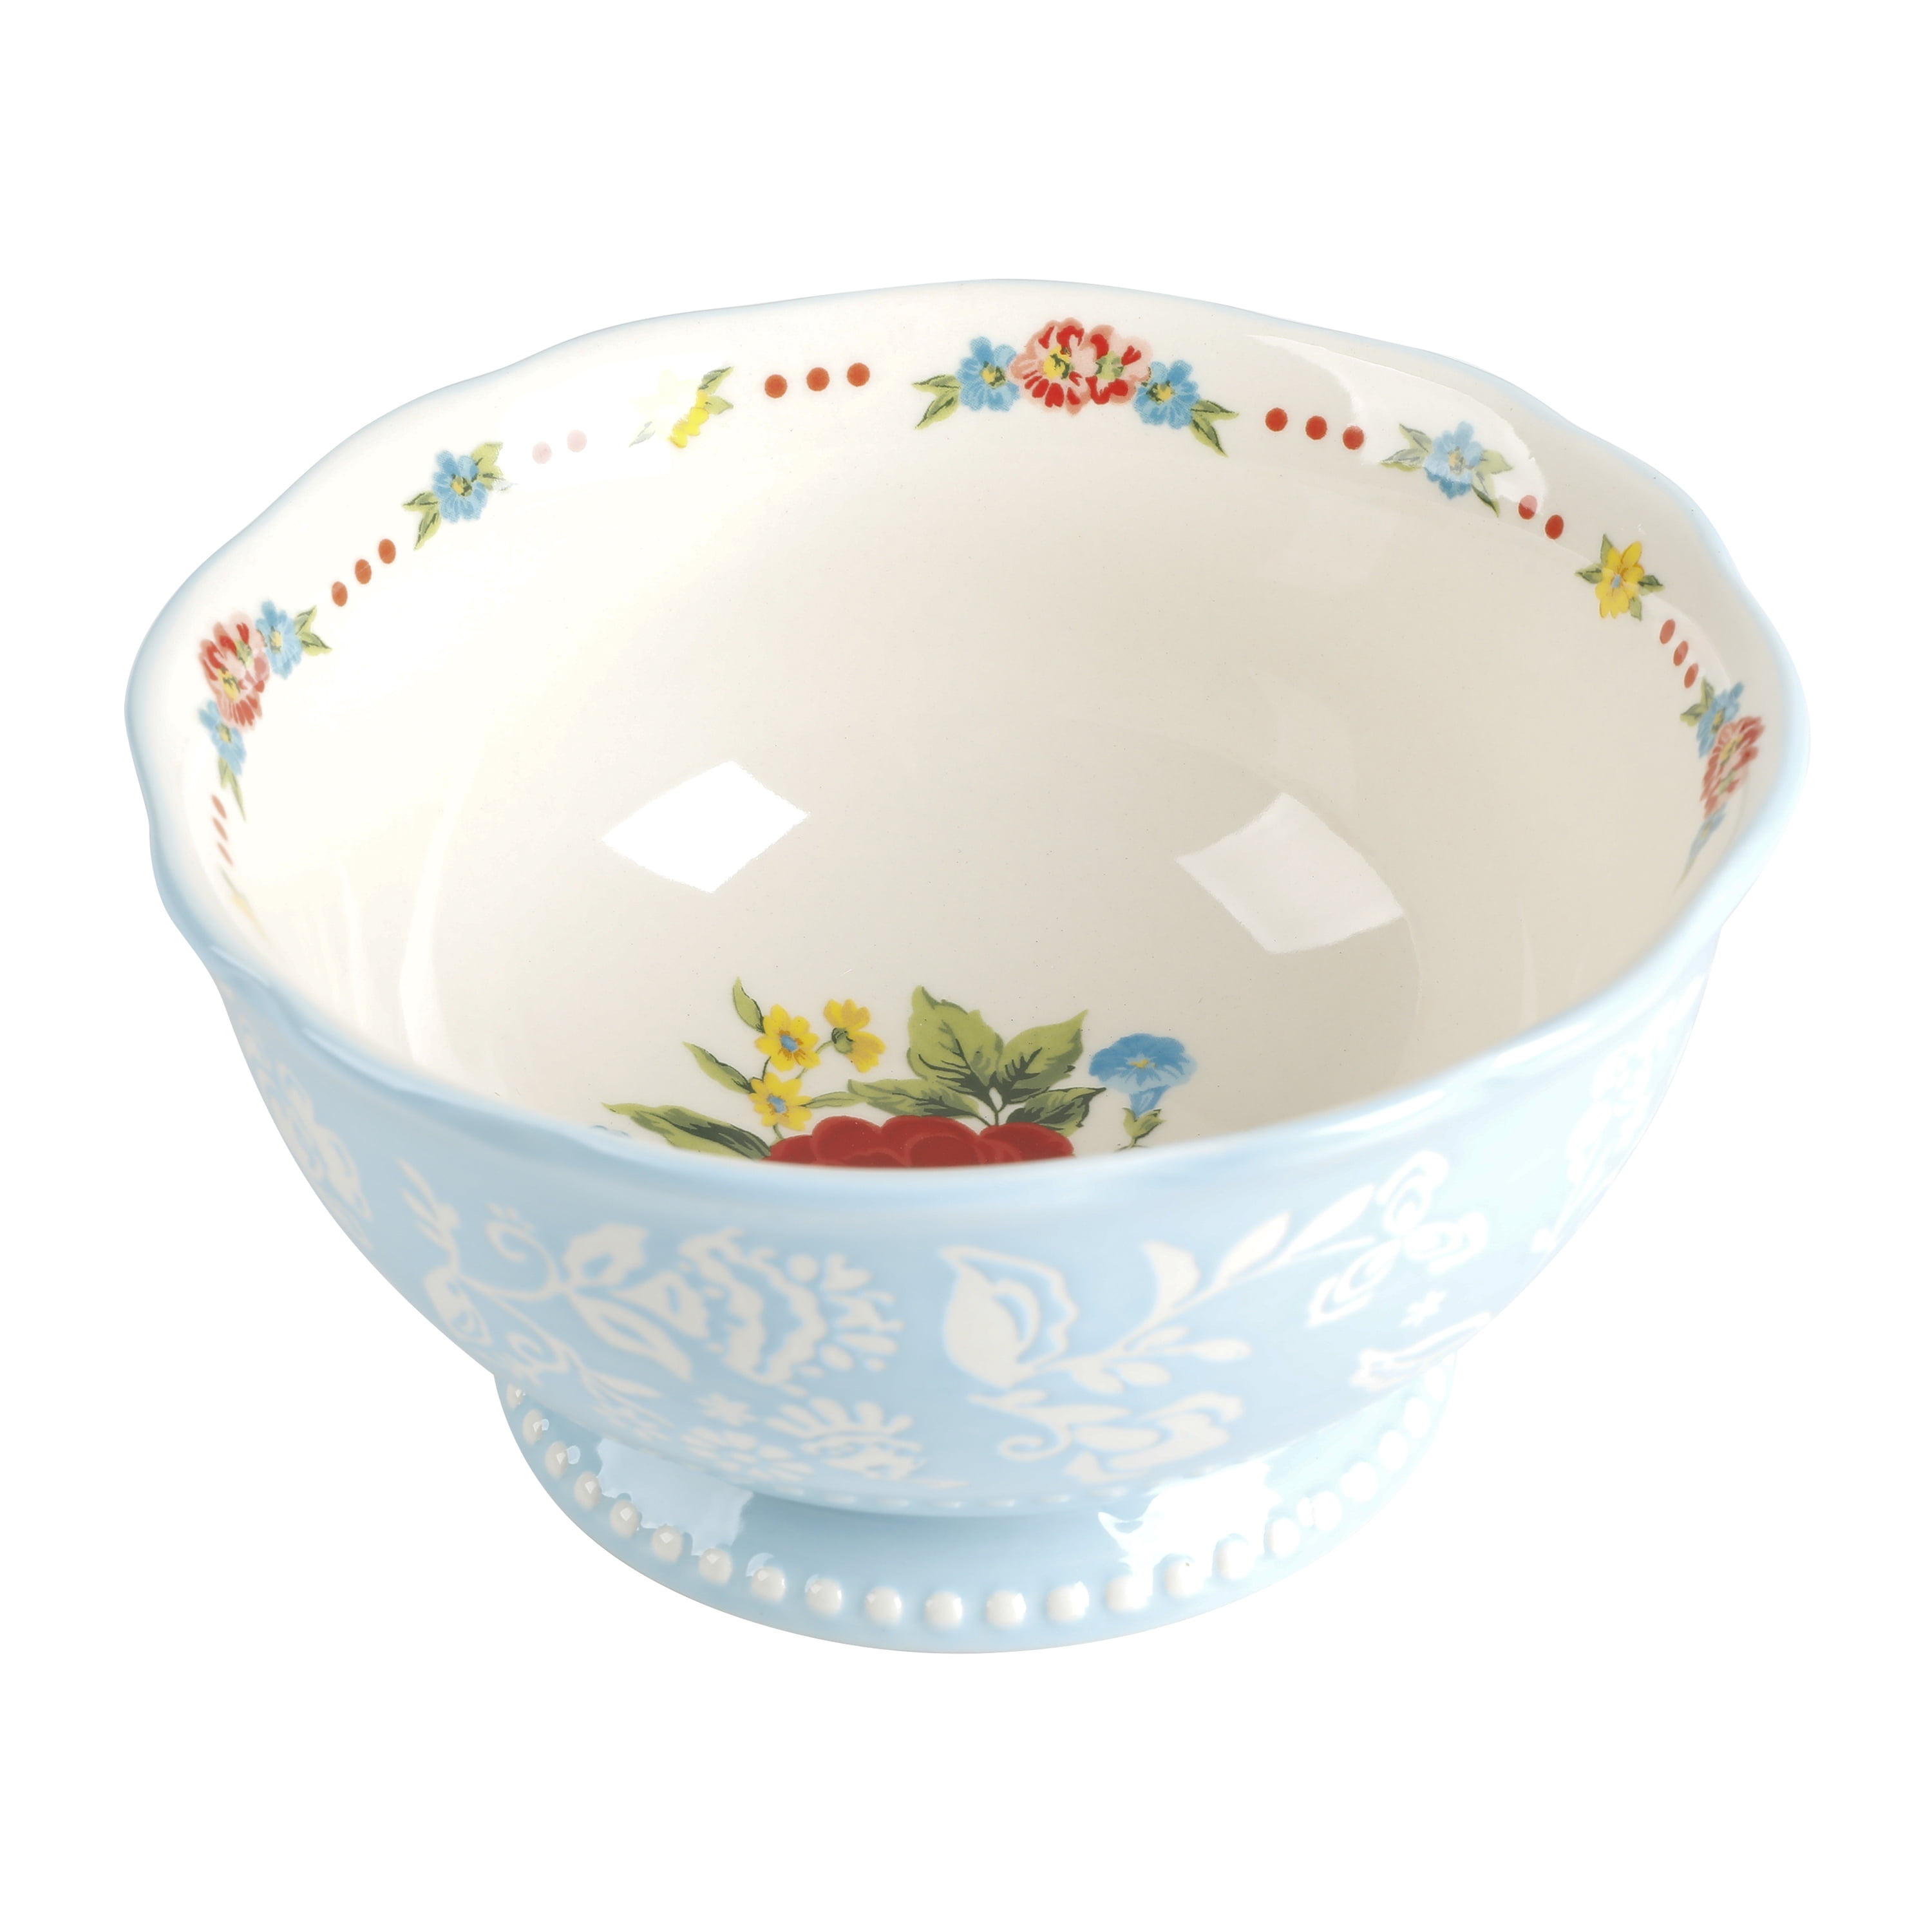 The Pioneer Woman 3-Piece Sweet Rose Sentiment Serving Bowls Set